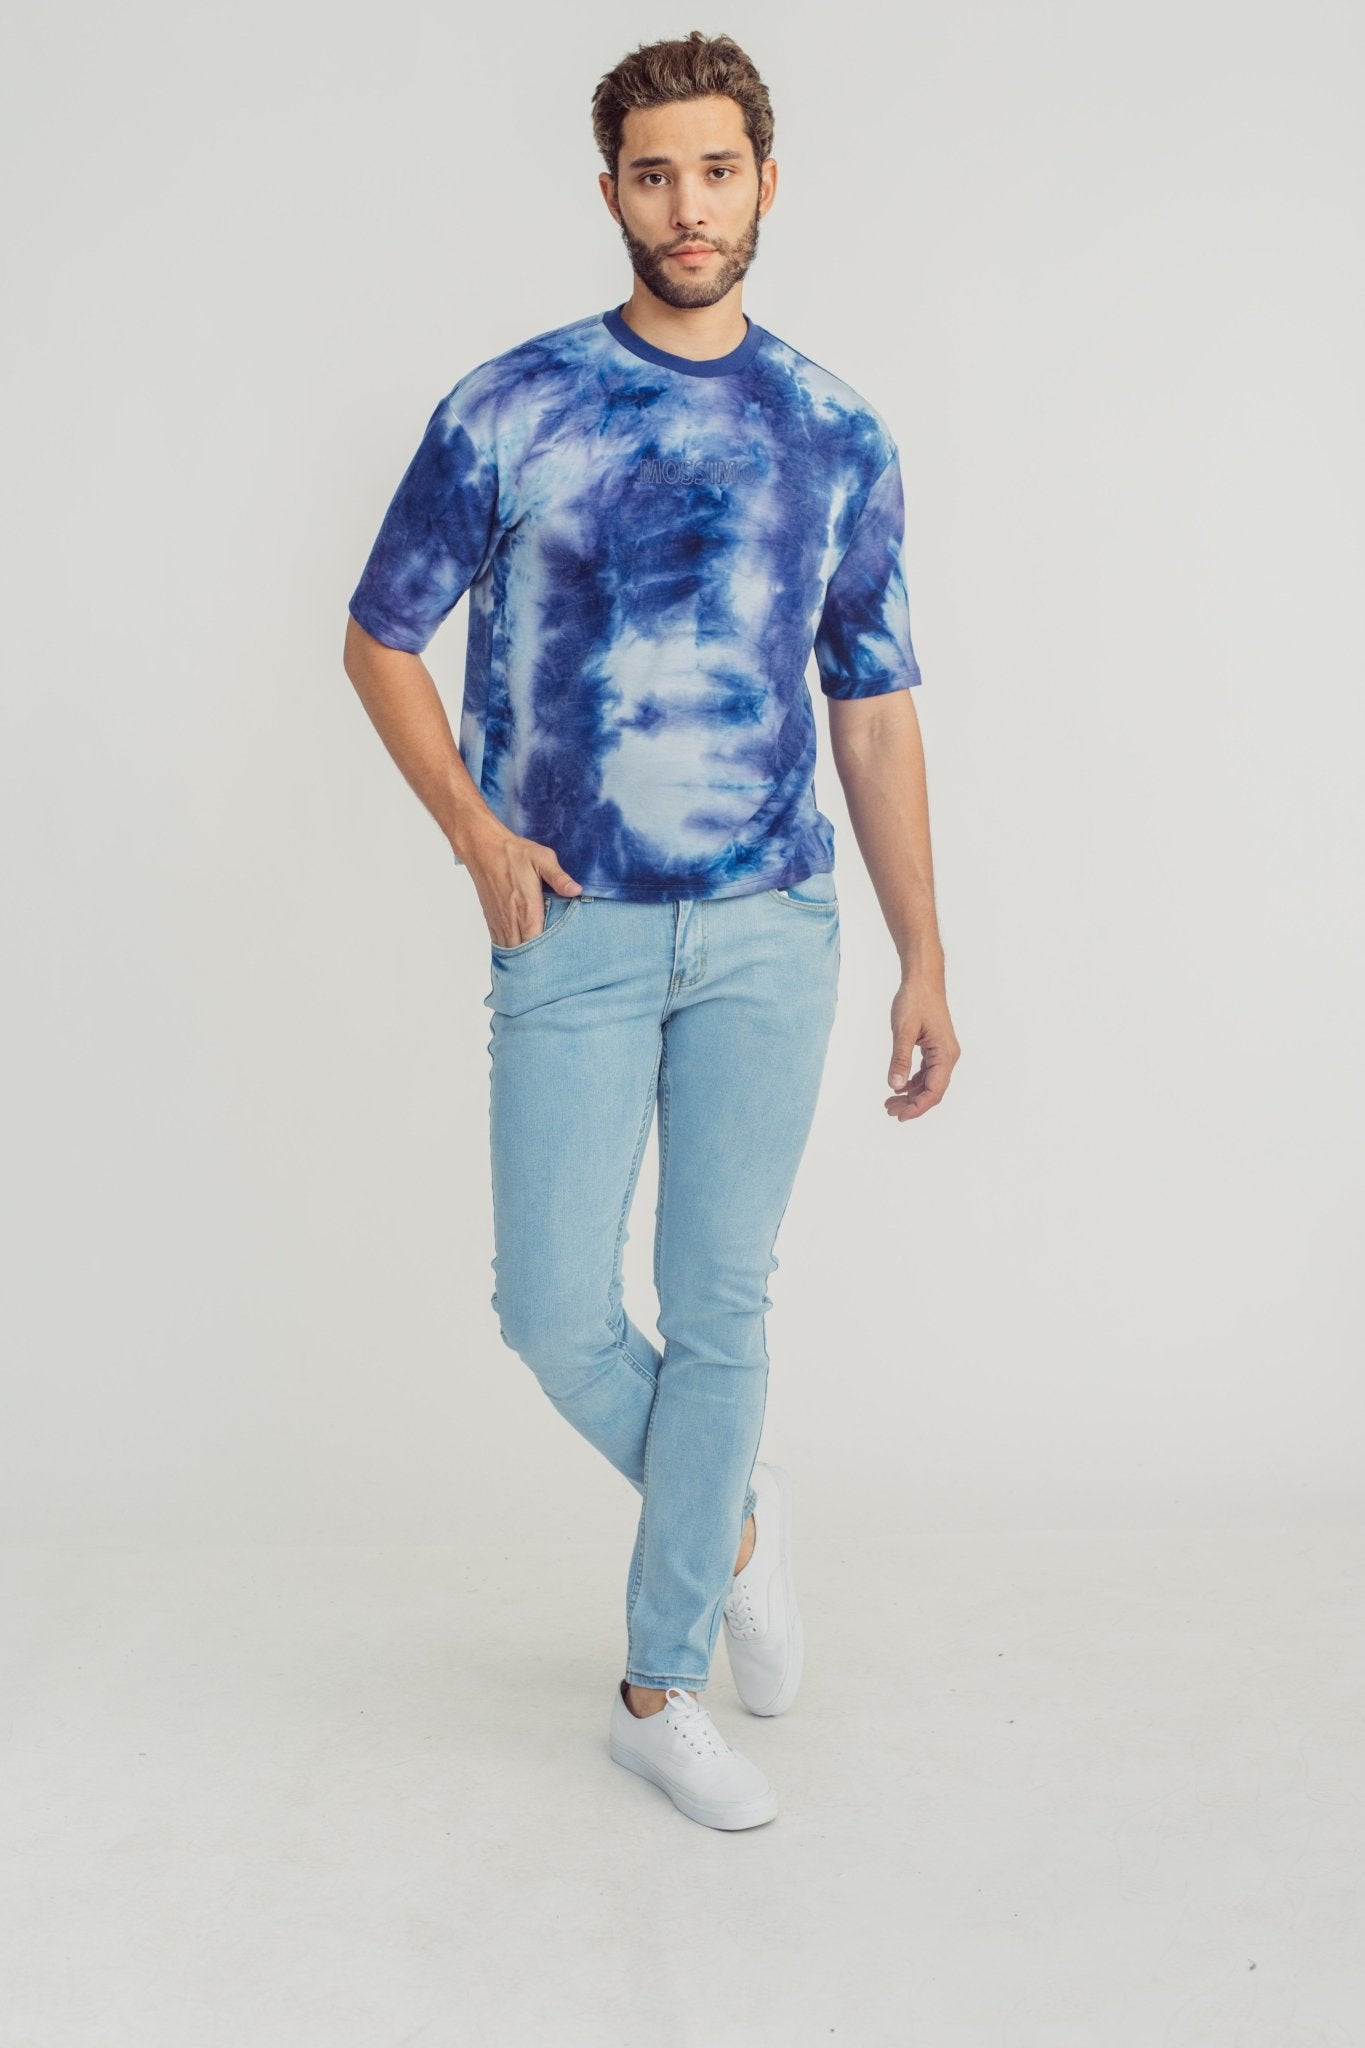 Blue Round Neck Tie Dye Shirt with High Density Print - Mossimo PH